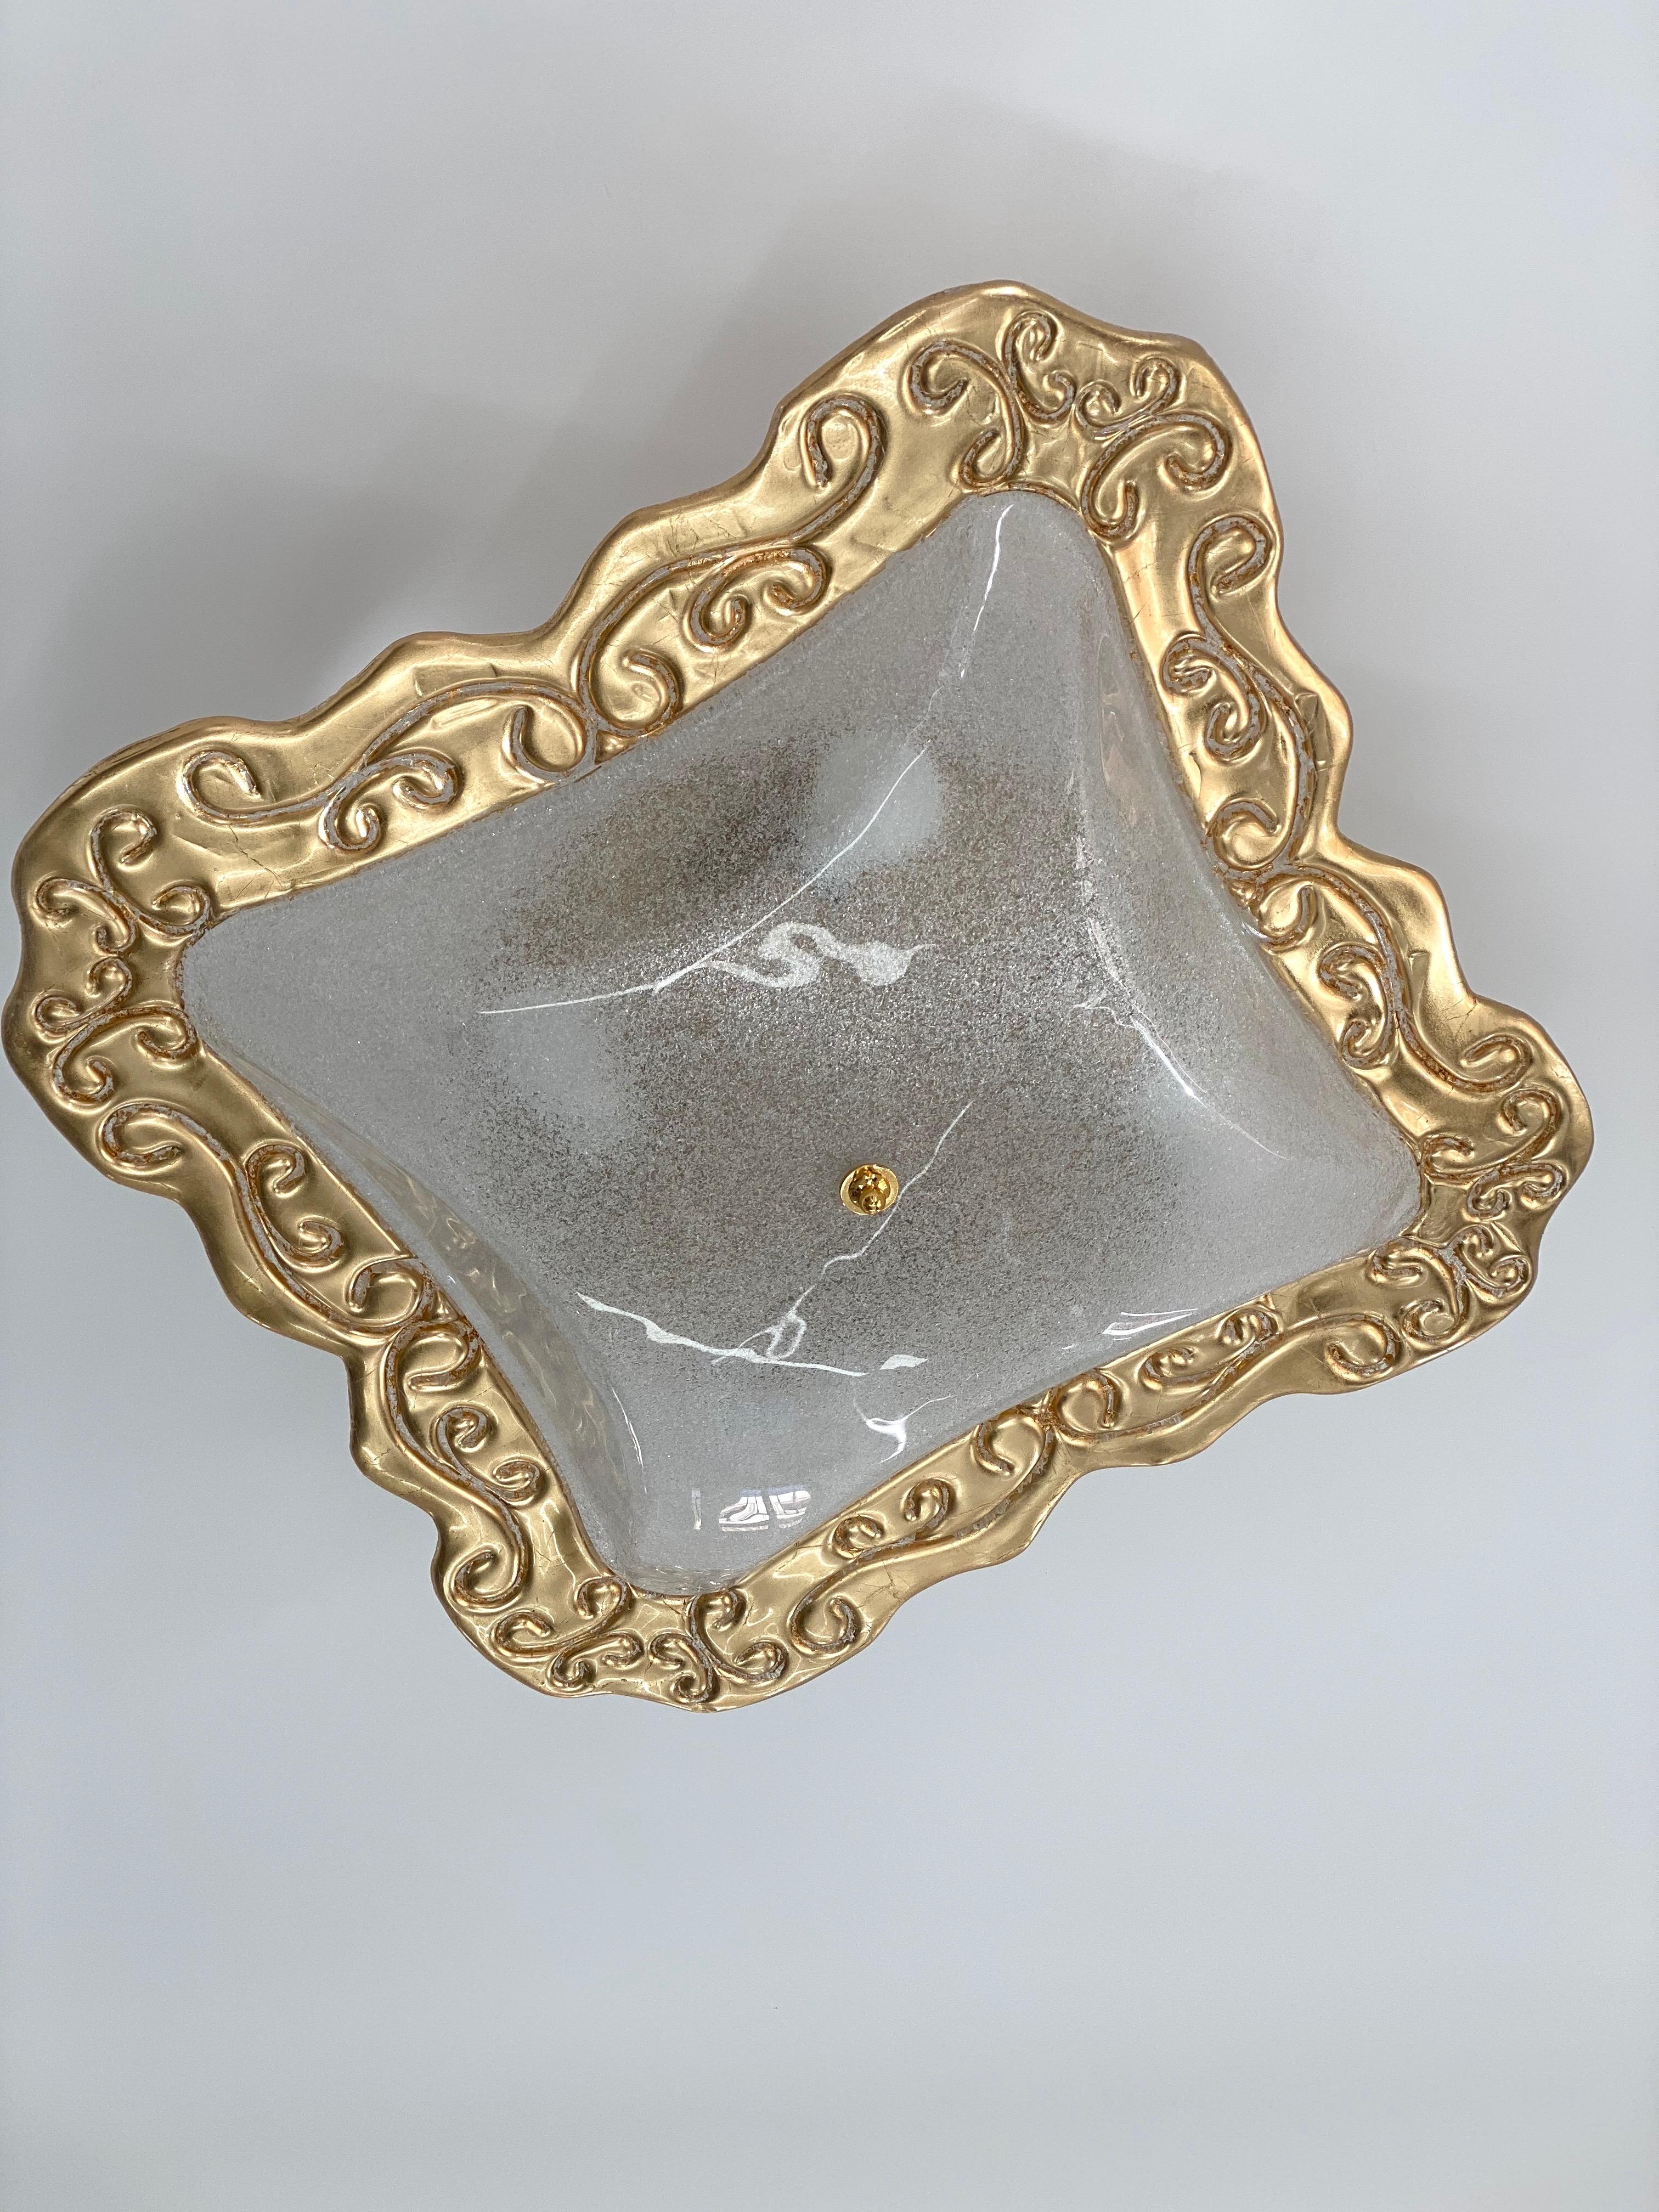 Huge Art Deco Style Square Murano Glass and Gold Modern Flushmount For Sale 1